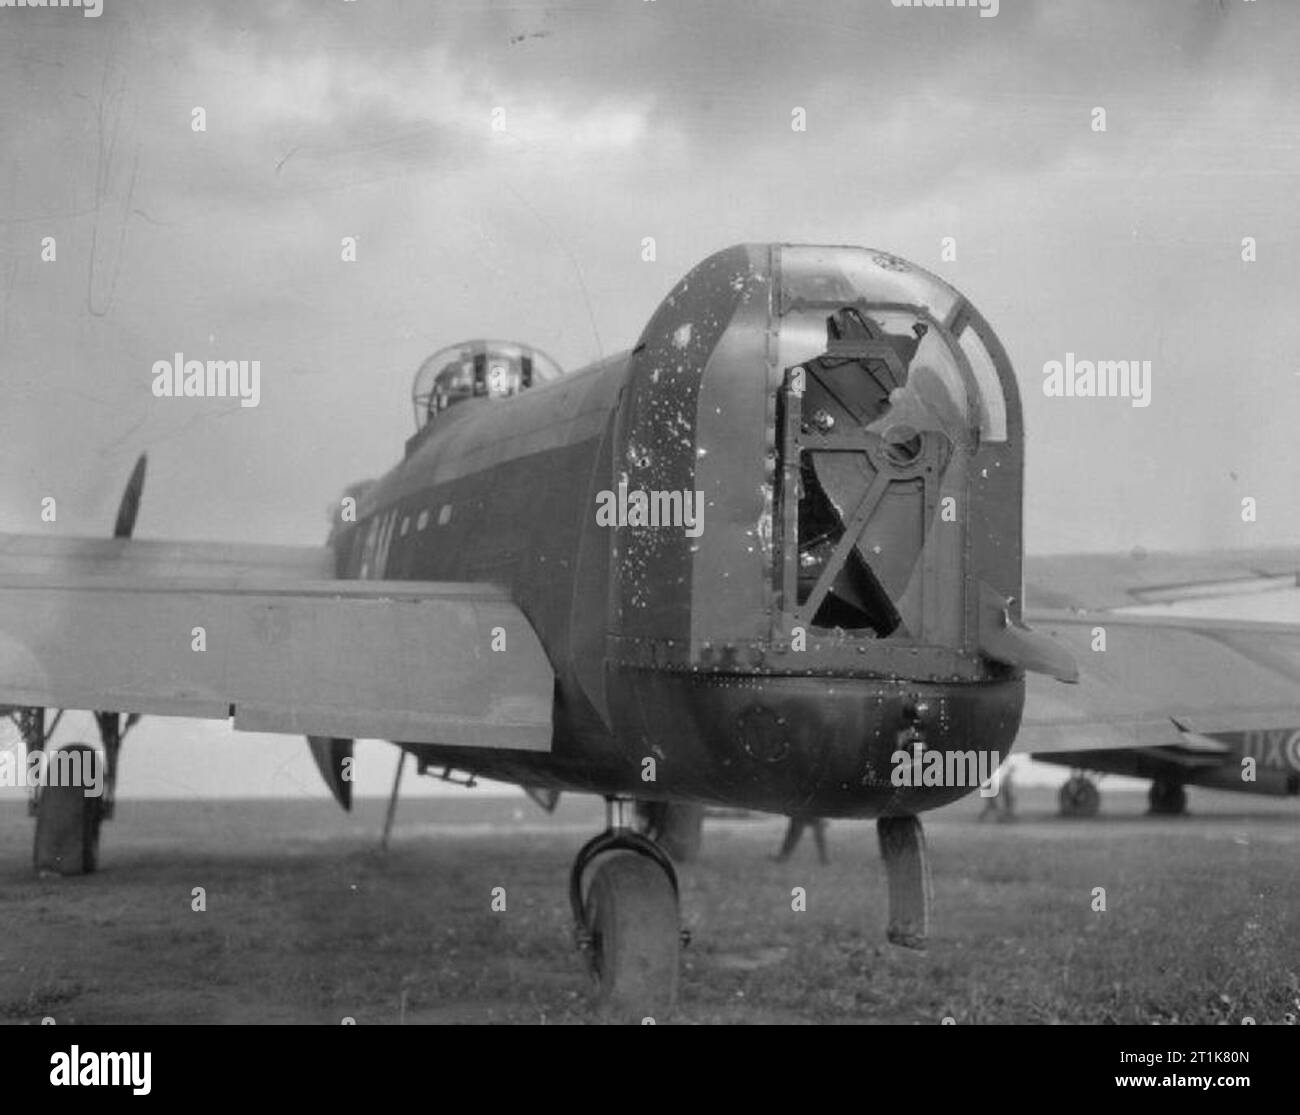 Royal Air Force Bomber Command, 1942-1945. The wrecked rear turret of Avro Lancaster B Mark I, ED413 'DX-M' 'Minnie the Moocher', of No. 57 Squadron RAF at Scampton, Lincolnshire, after returning from a night raid to Oberhausen, Germany, on the night of 14/15 June 1943, during which it was attacked by German night fighters. A cannon shell exploded in the rear turret, killing the gunner, Sergeant R F Haynes of Nuneaton Cheshire, while further strikes smashed the radio and navigational equipment, and riddled the fuselage of the aircraft with holes. The pilot, Sergeant A H Moores of Bromley, Kent Stock Photo